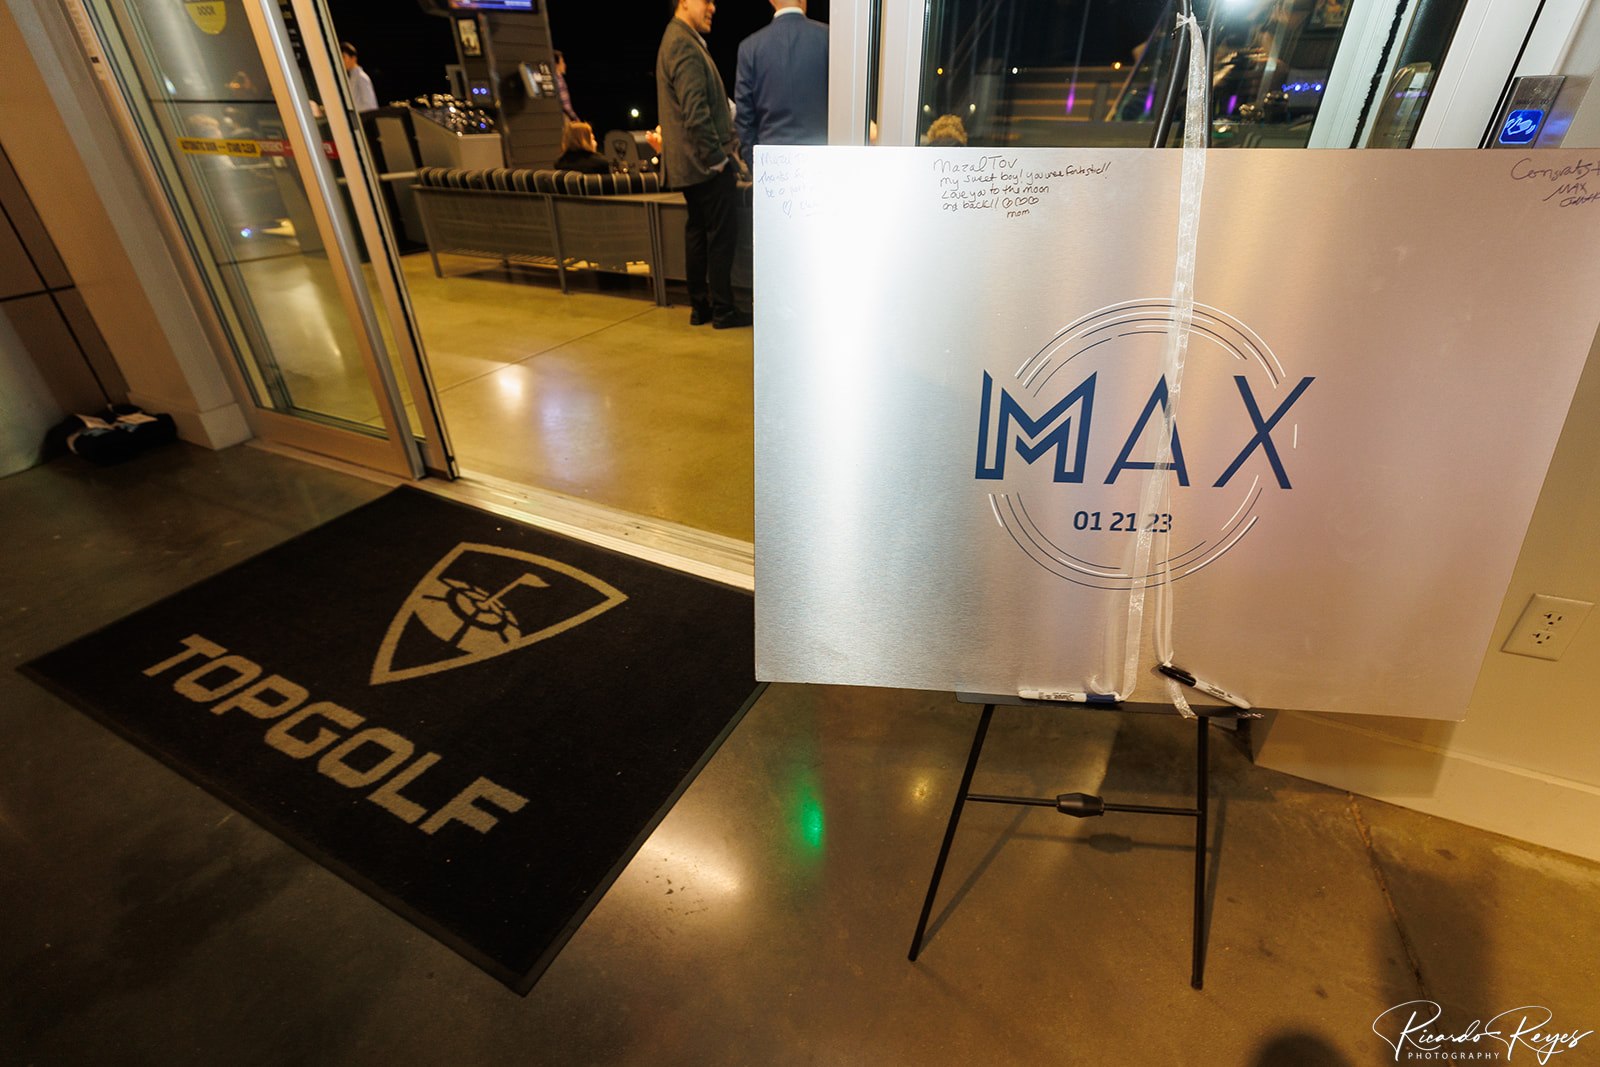 Max's silver signage with blue logo at Max's Sporty Bar Mitzvah Party at Top Golf in Germantown, MD | Pop Color Events | Adding a Pop of Color to Bar & Bat Mitzvahs in DC, MD & VA | Photo by: Chocolate fountain at Max's Sporty Bar Mitzvah Party at Top Golf in Germantown, MD | Pop Color Events | Adding a Pop of Color to Bar & Bat Mitzvahs in DC, MD & VA | Photo by: Ricardo Reyes Photography